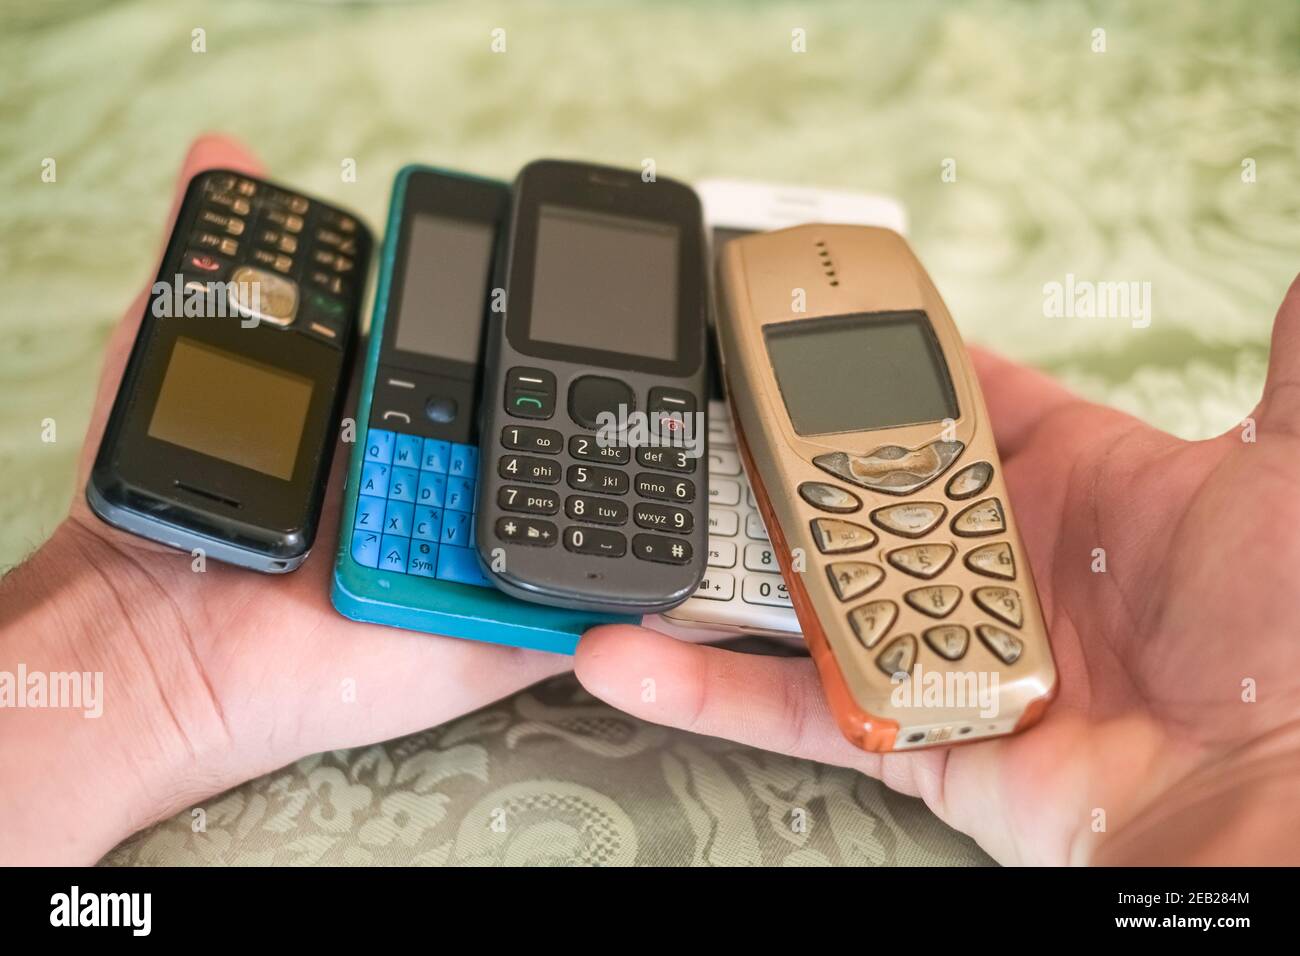 Man hand while hold pile of old gen mobile phones,technology concept Stock Photo